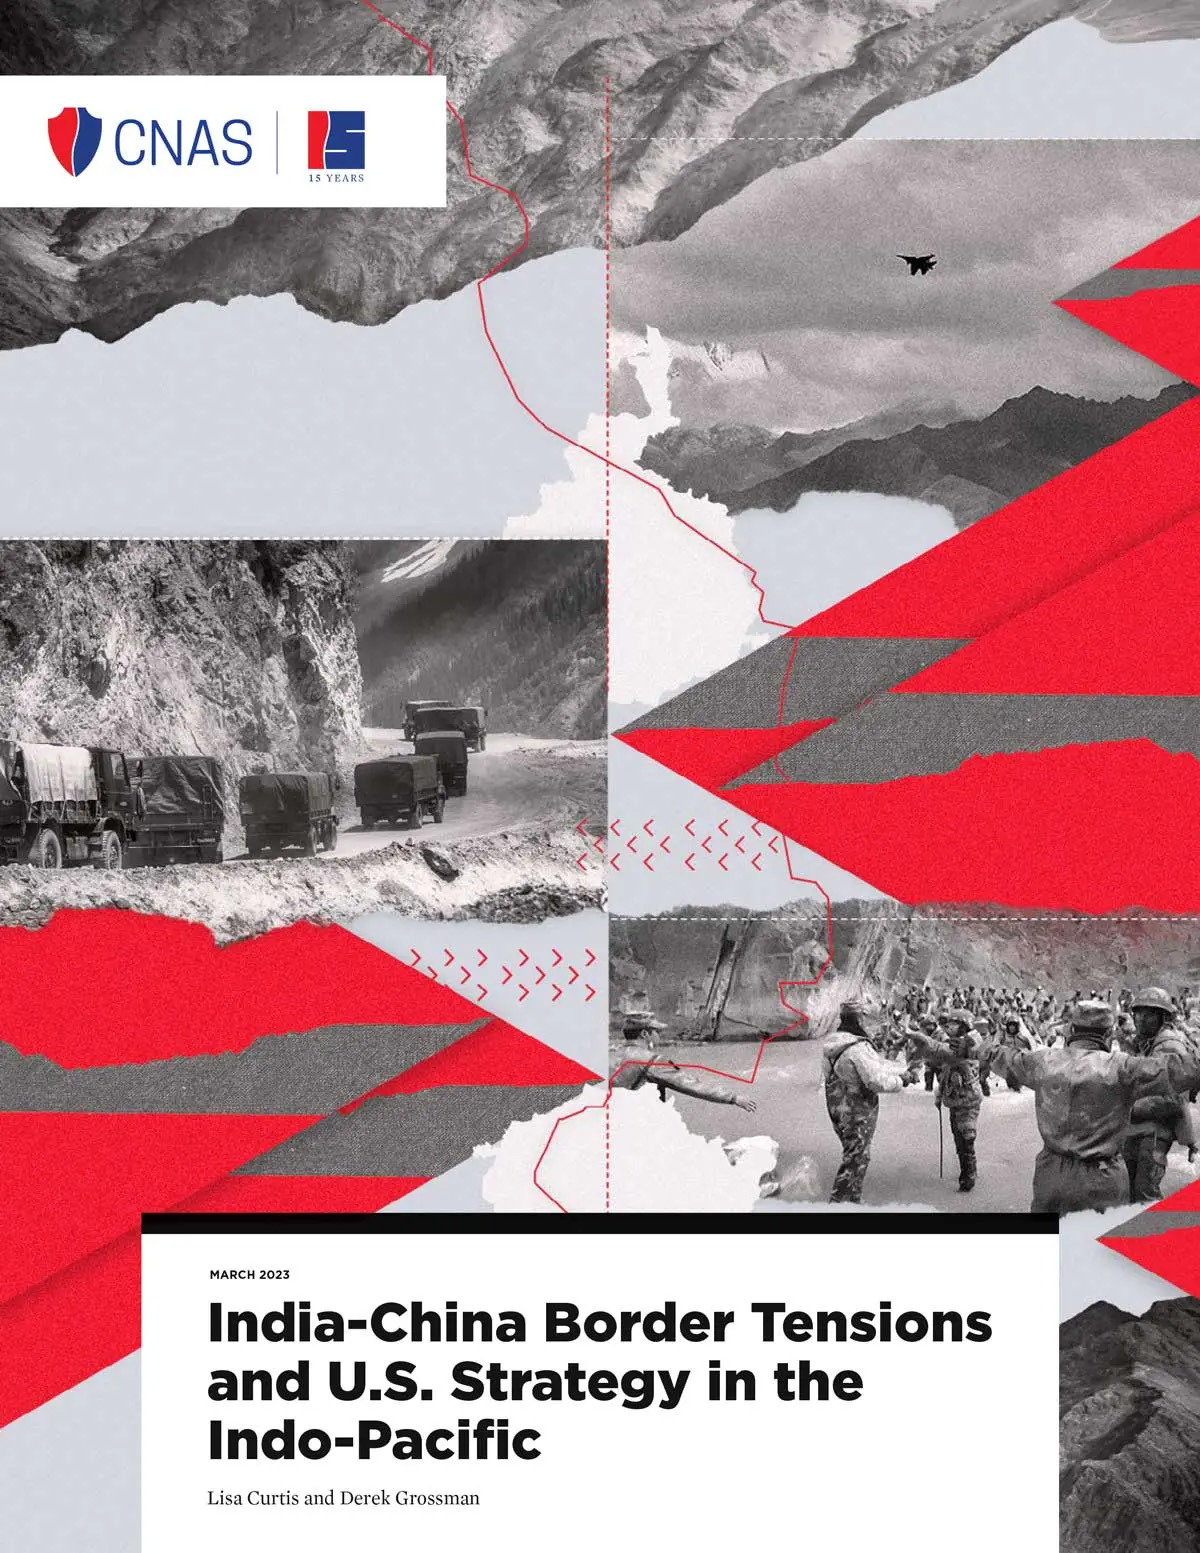 India-China Border Tensions and U.S. Strategy in the Indo-Pacific